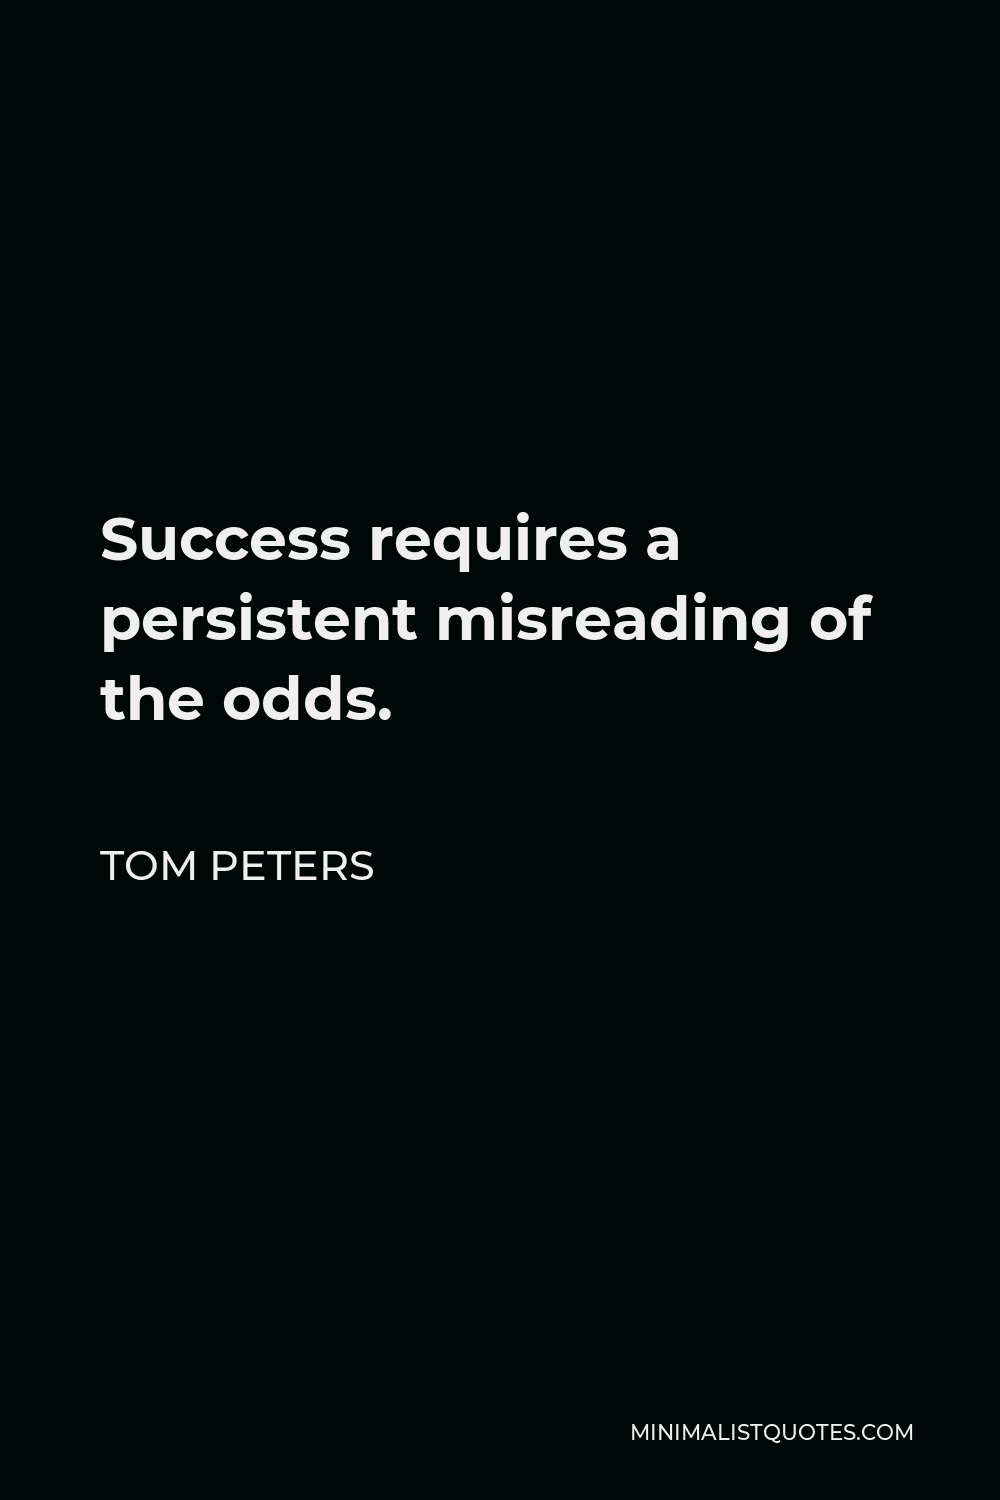 Tom Peters Quote - Success requires a persistent misreading of the odds.